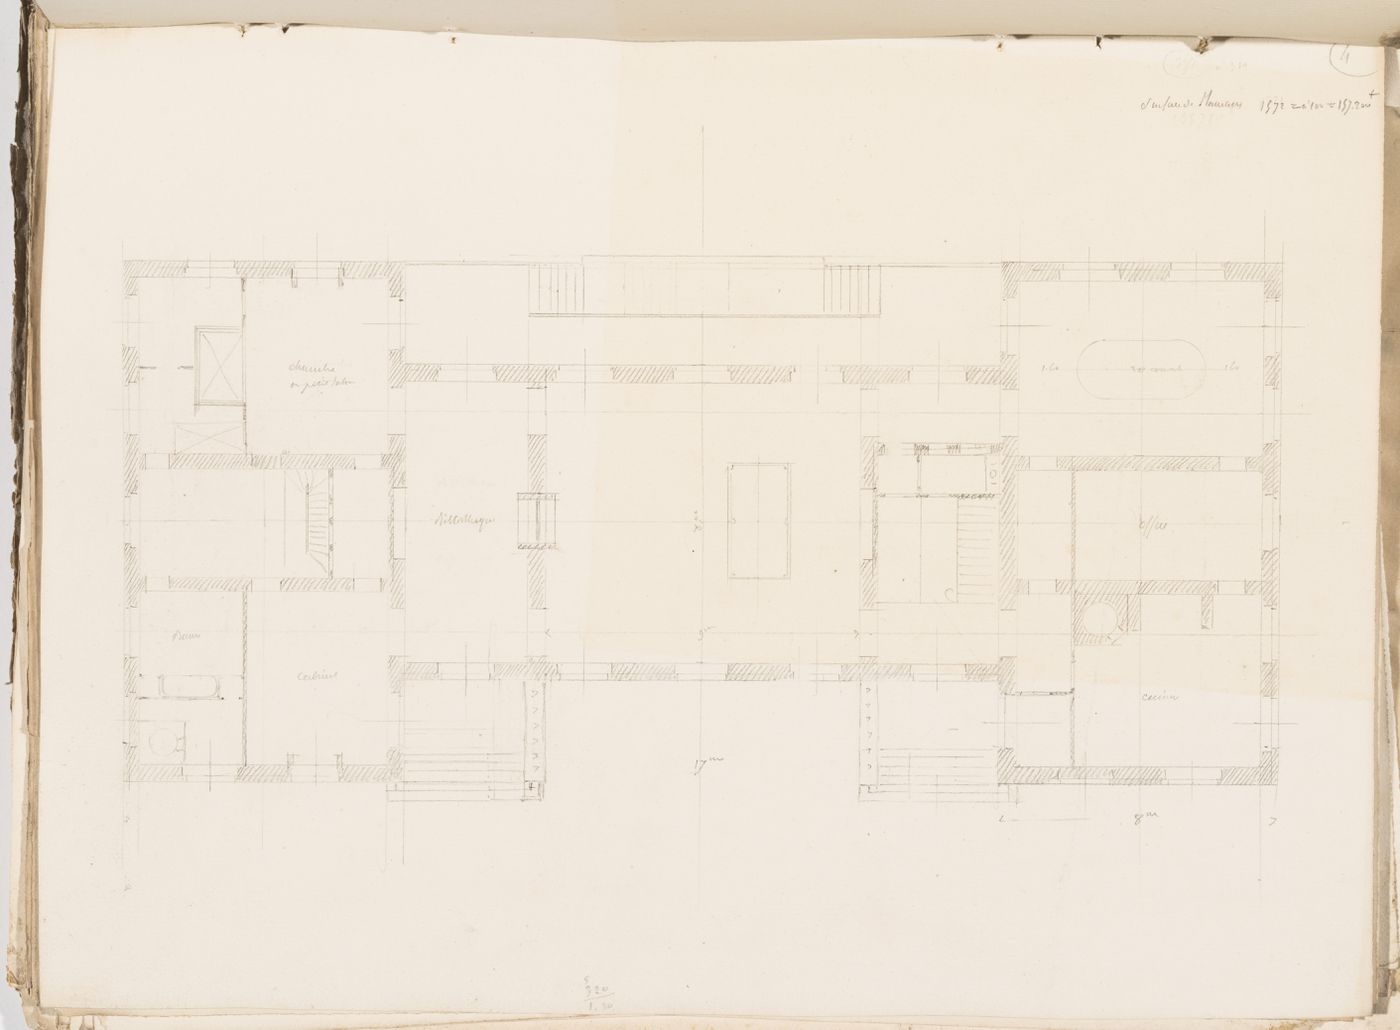 Project no. 4 for a country house for comte Treilhard: Ground floor plan